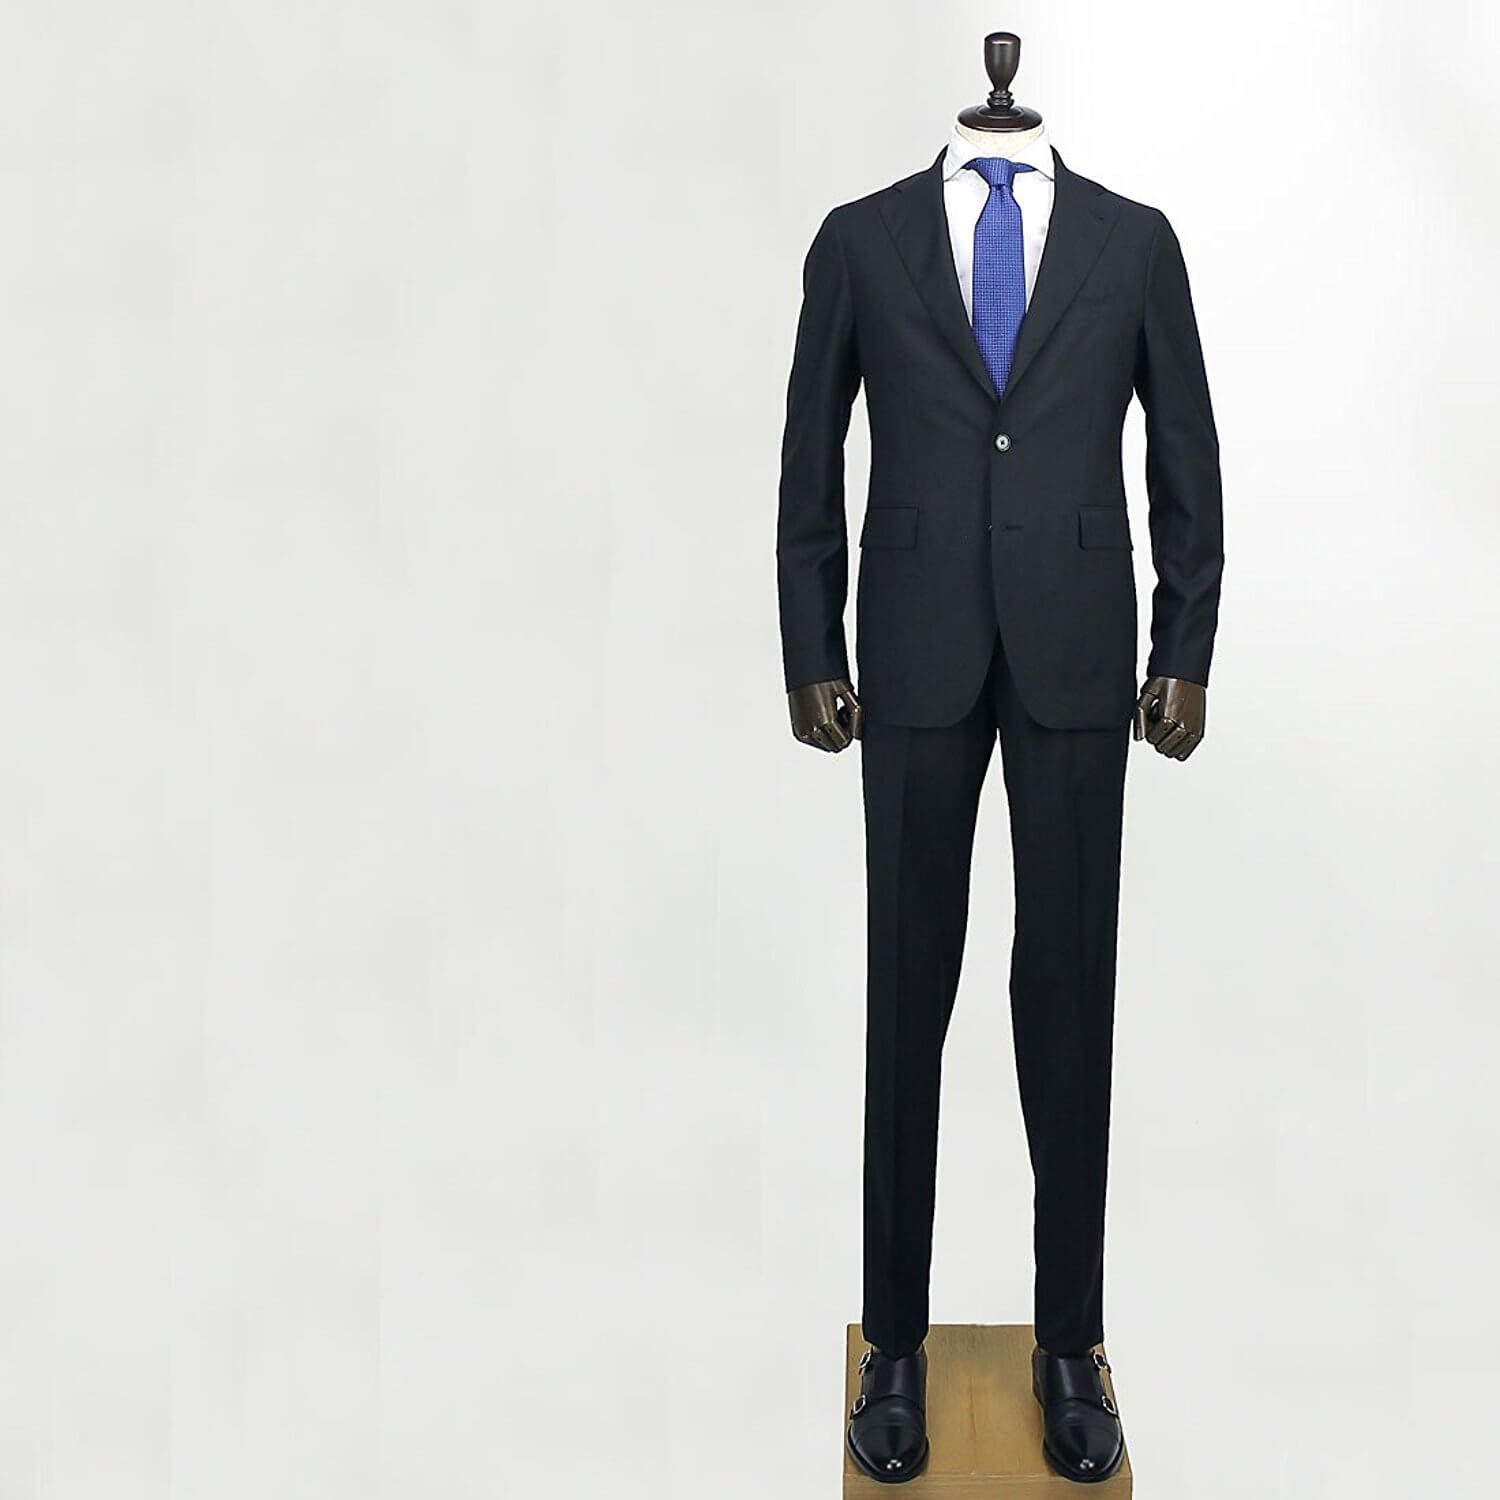 7 Best Fabrics That Are Great For Suits - MR KOACHMAN